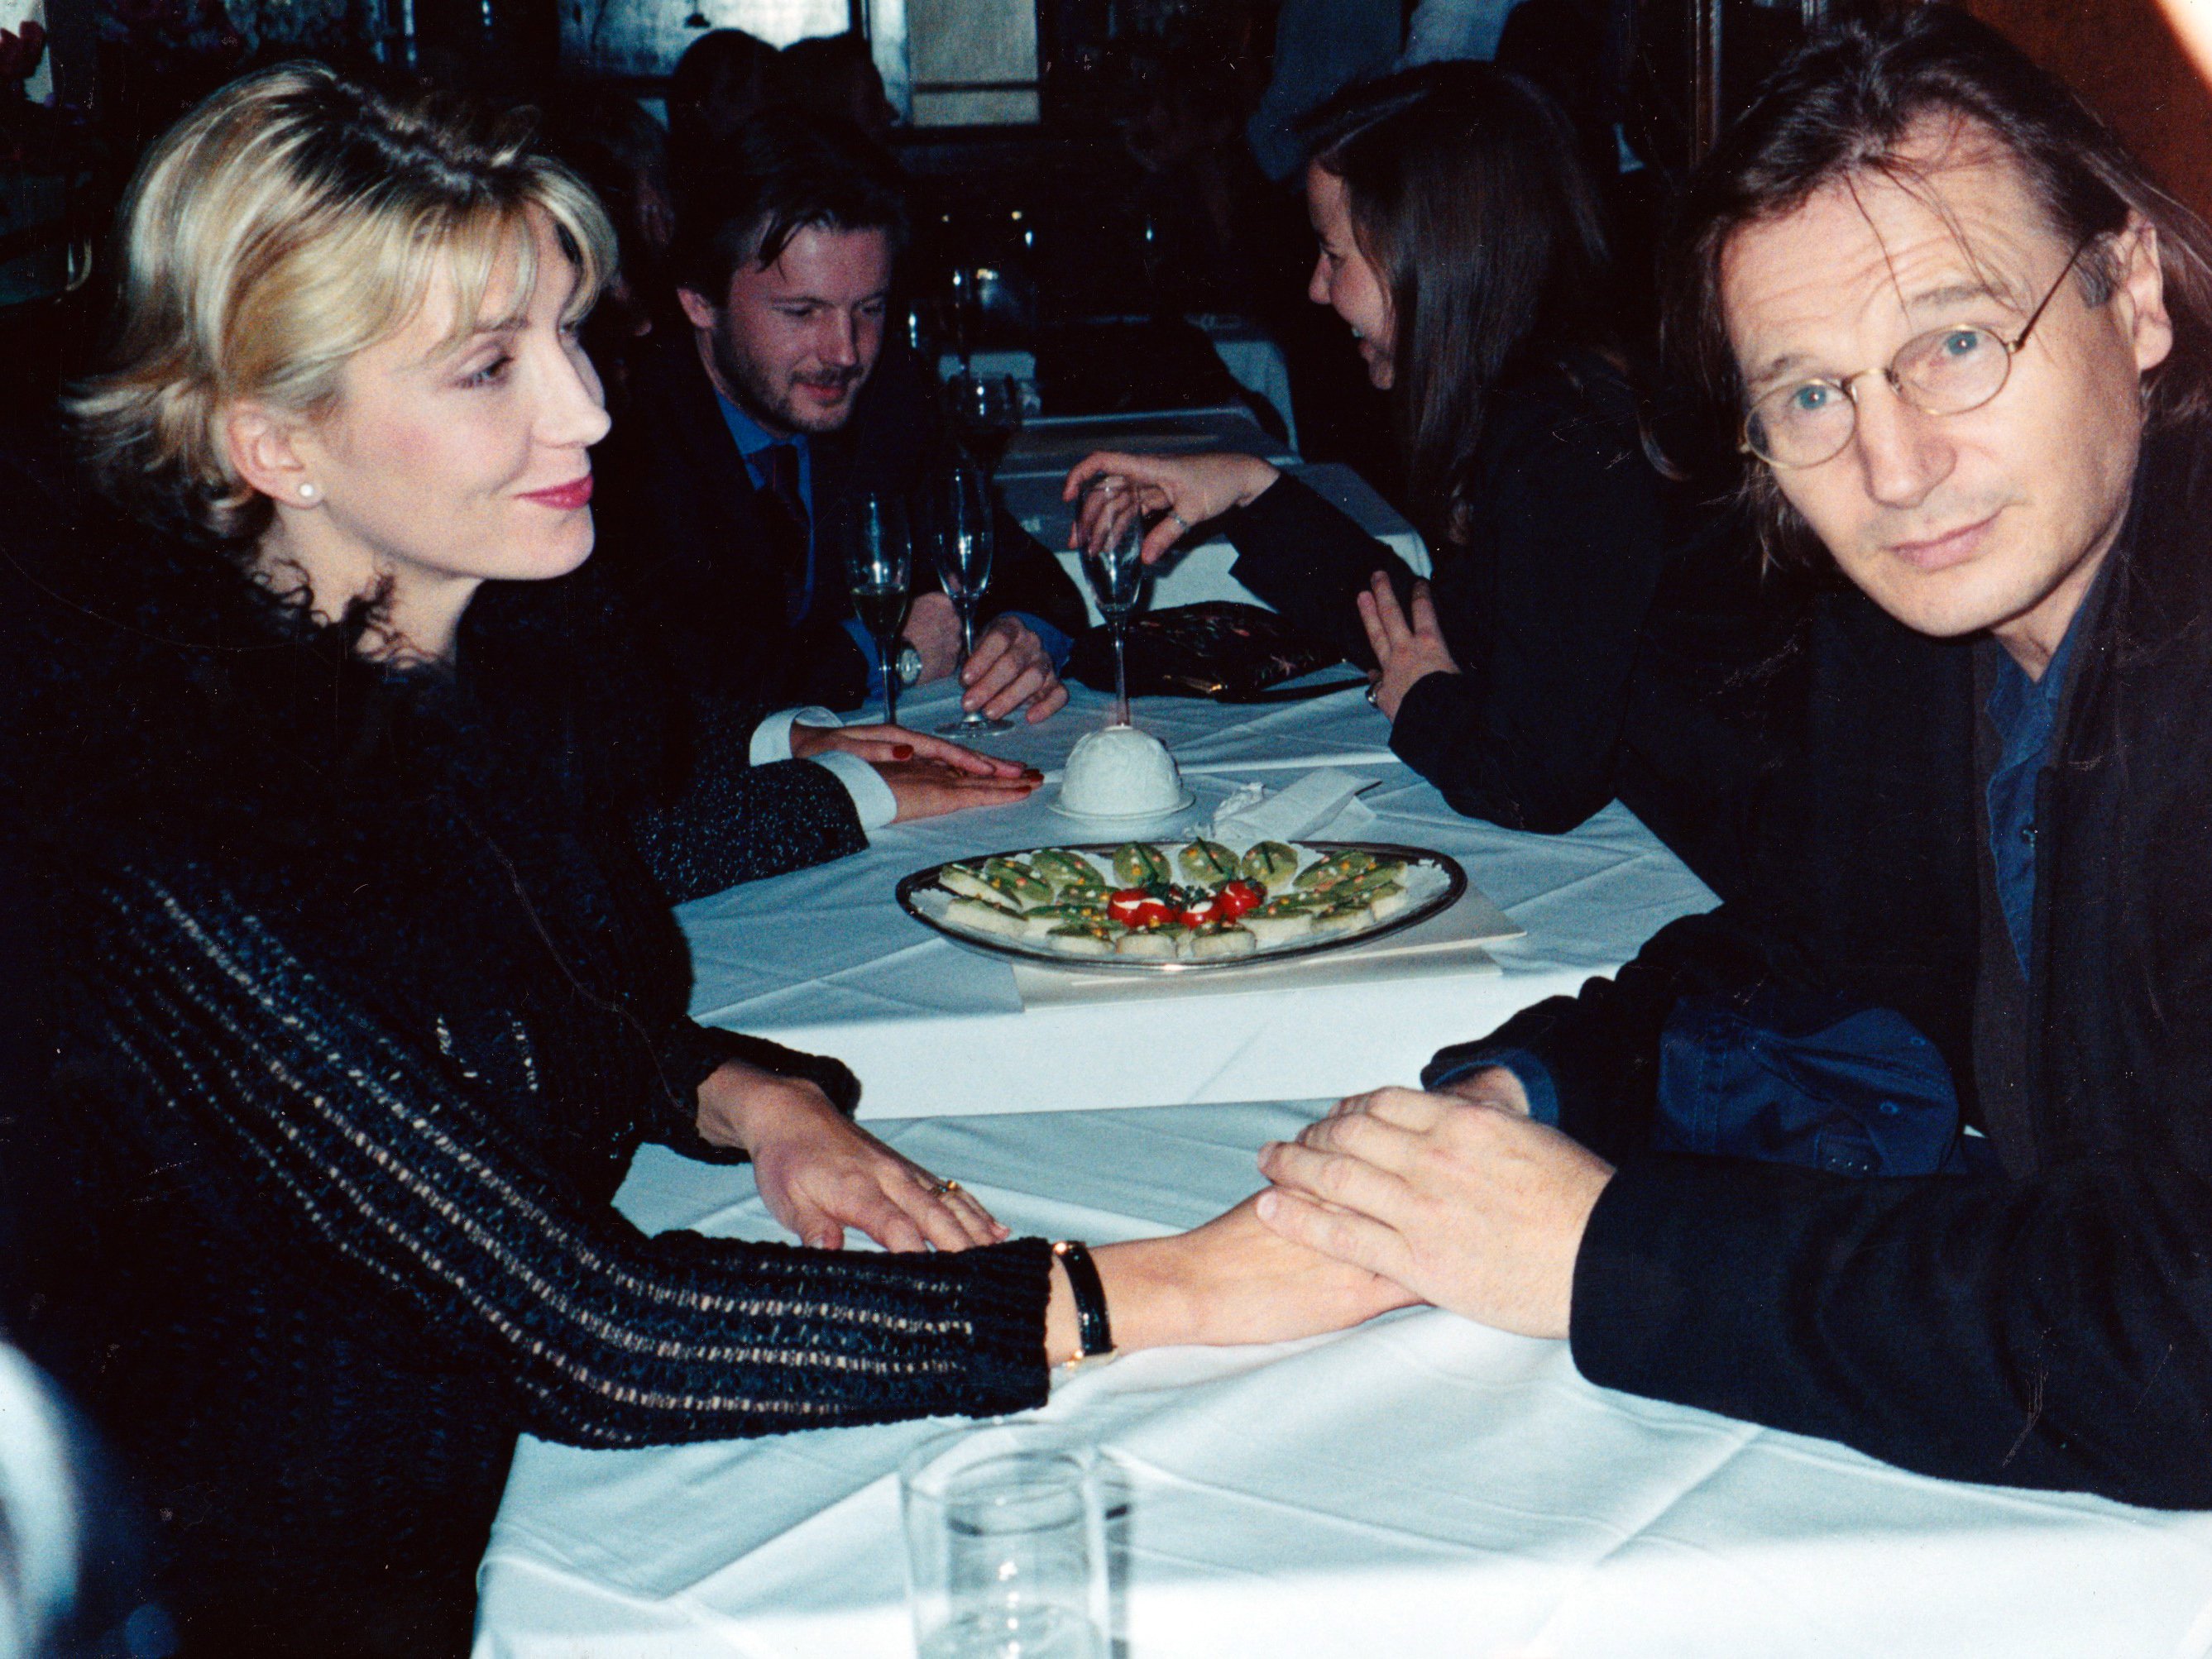 Broadway stars Liam Neeson and Natasha Richardson pictured holding hands in 1997 in New York City. / Source: Getty Images